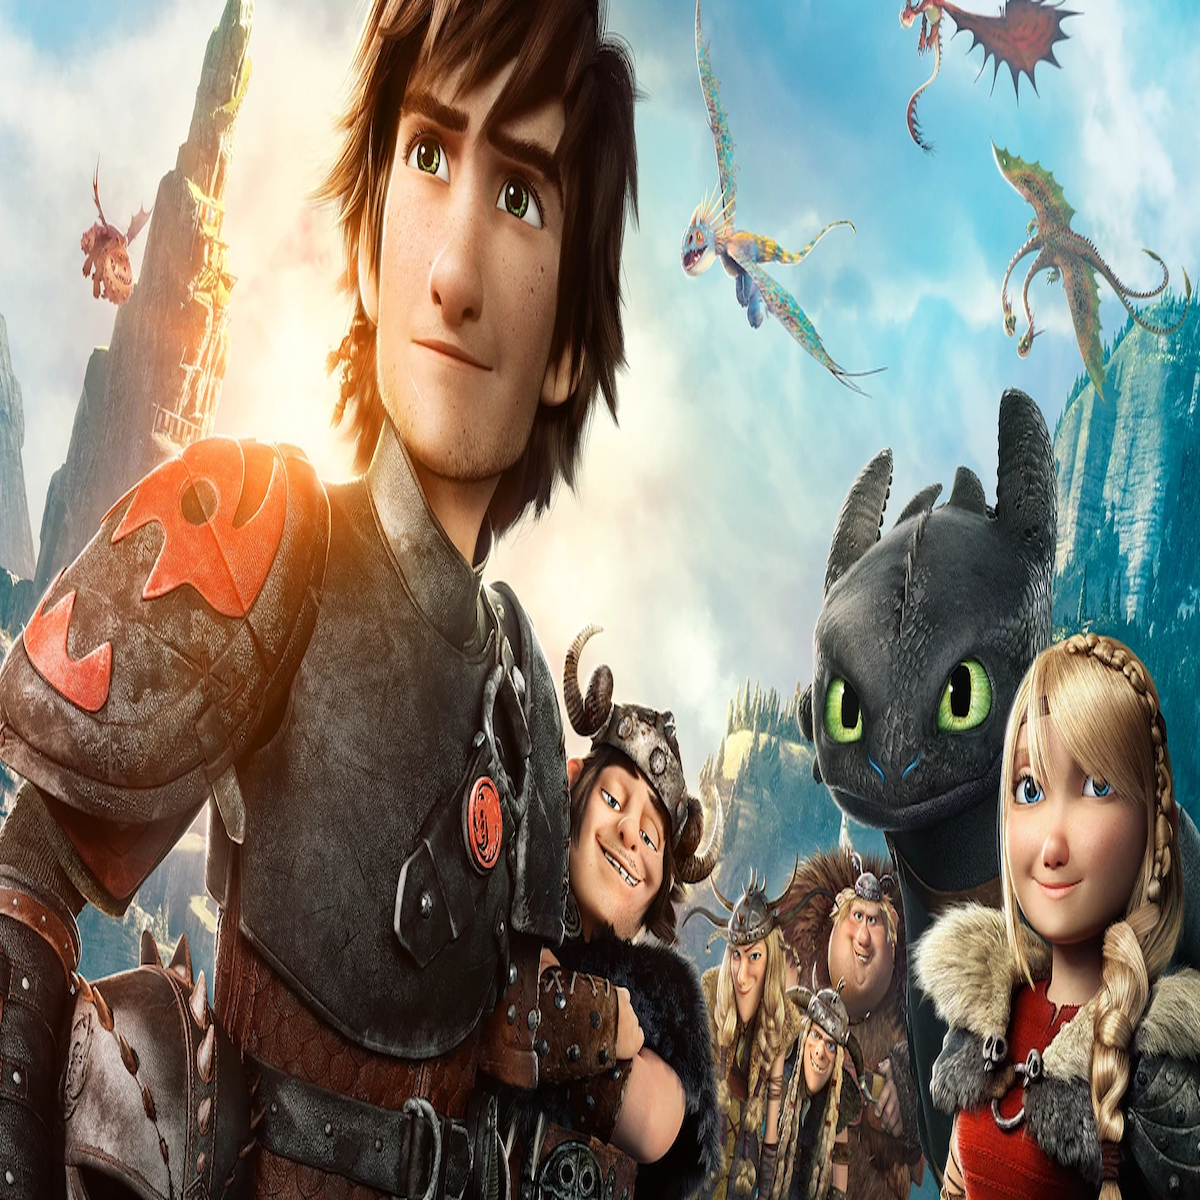 New How to Train Your Dragon show takes place 1,300 years after